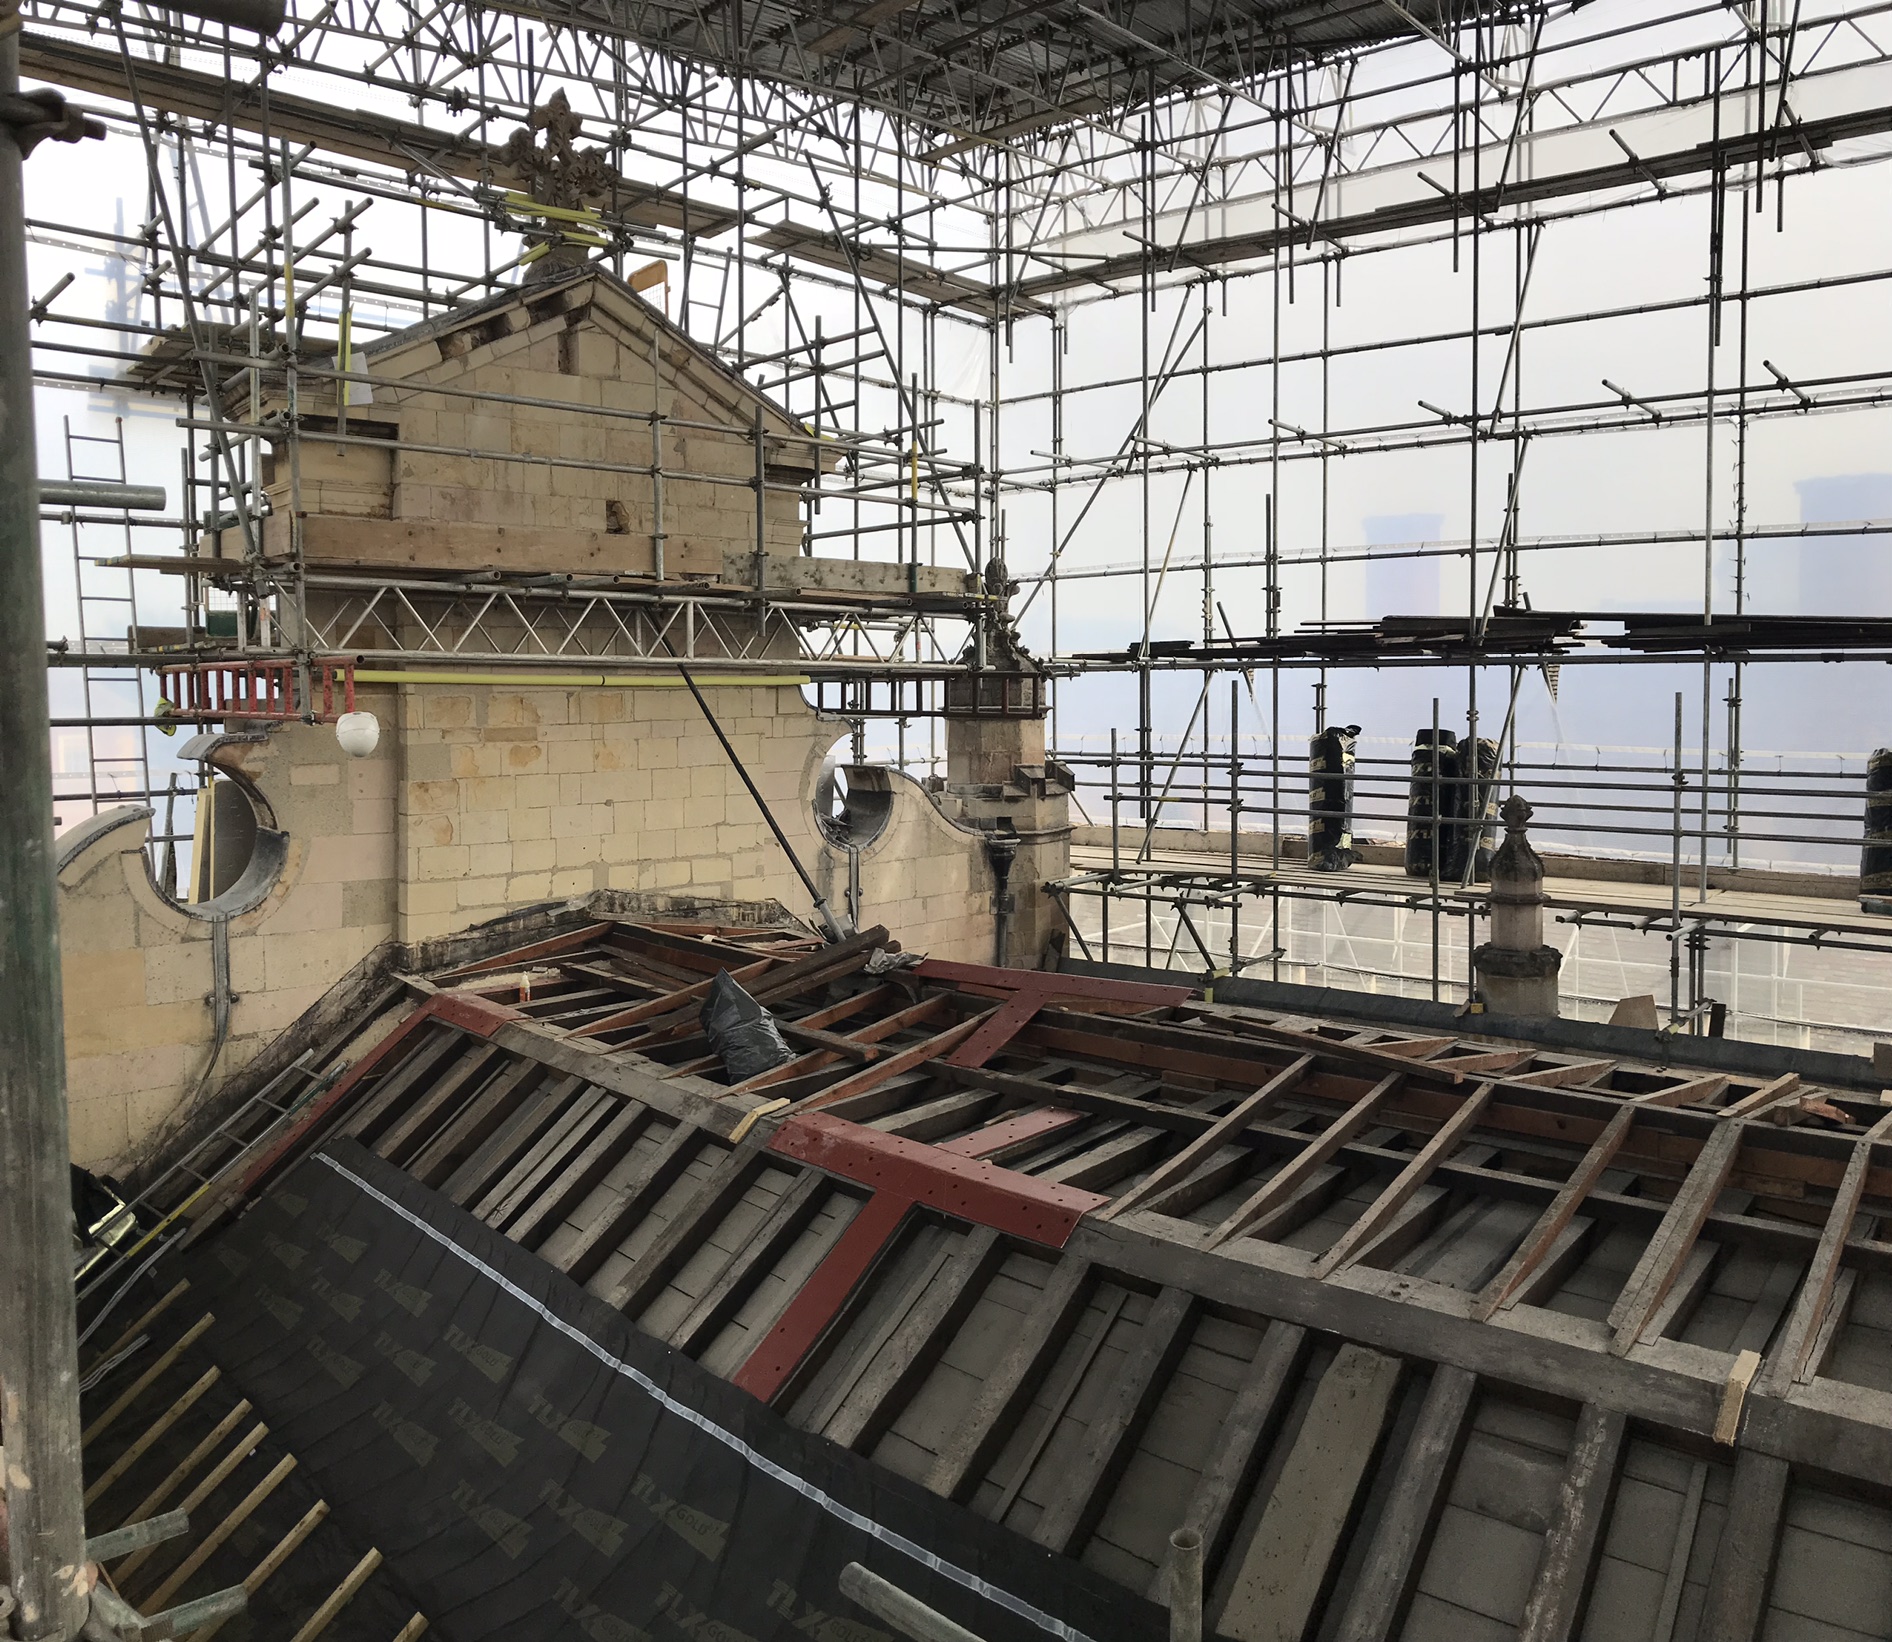 The Chapel roof being replaced